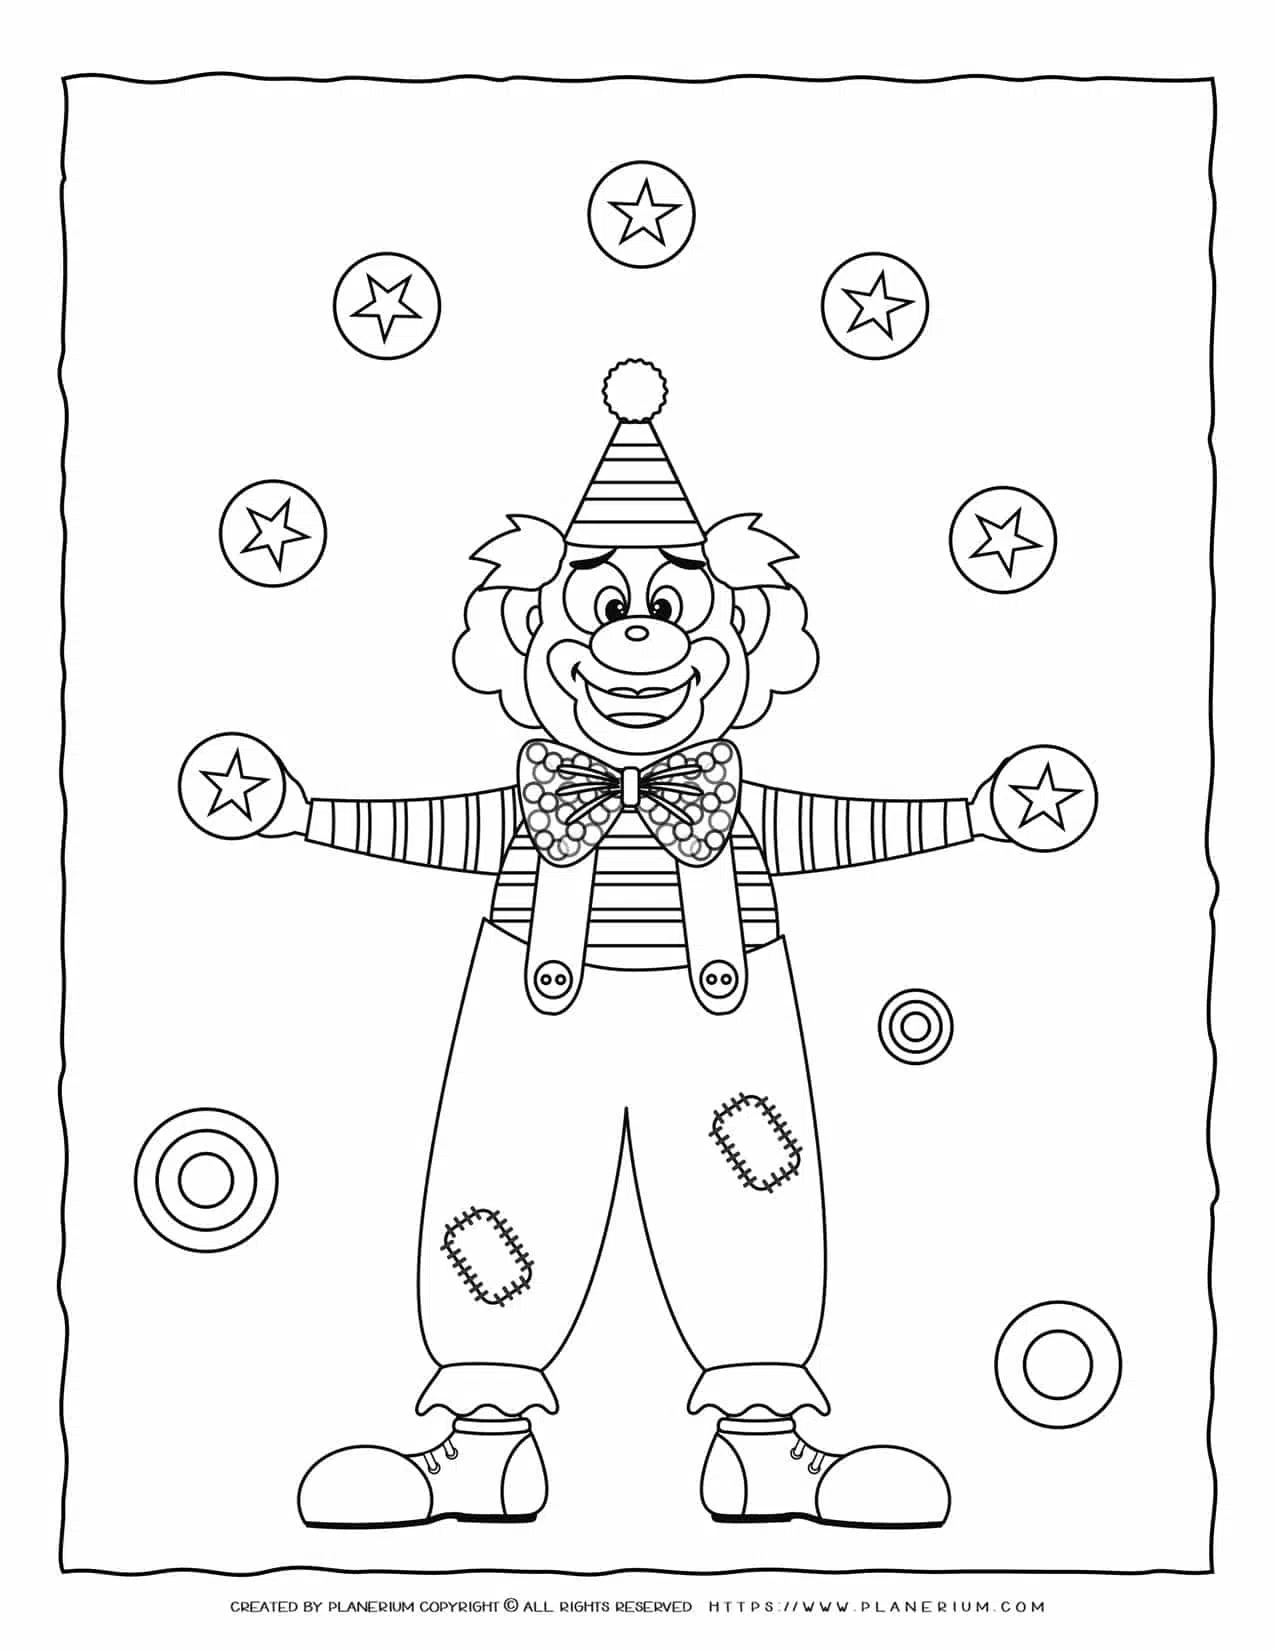 Carnival coloring page